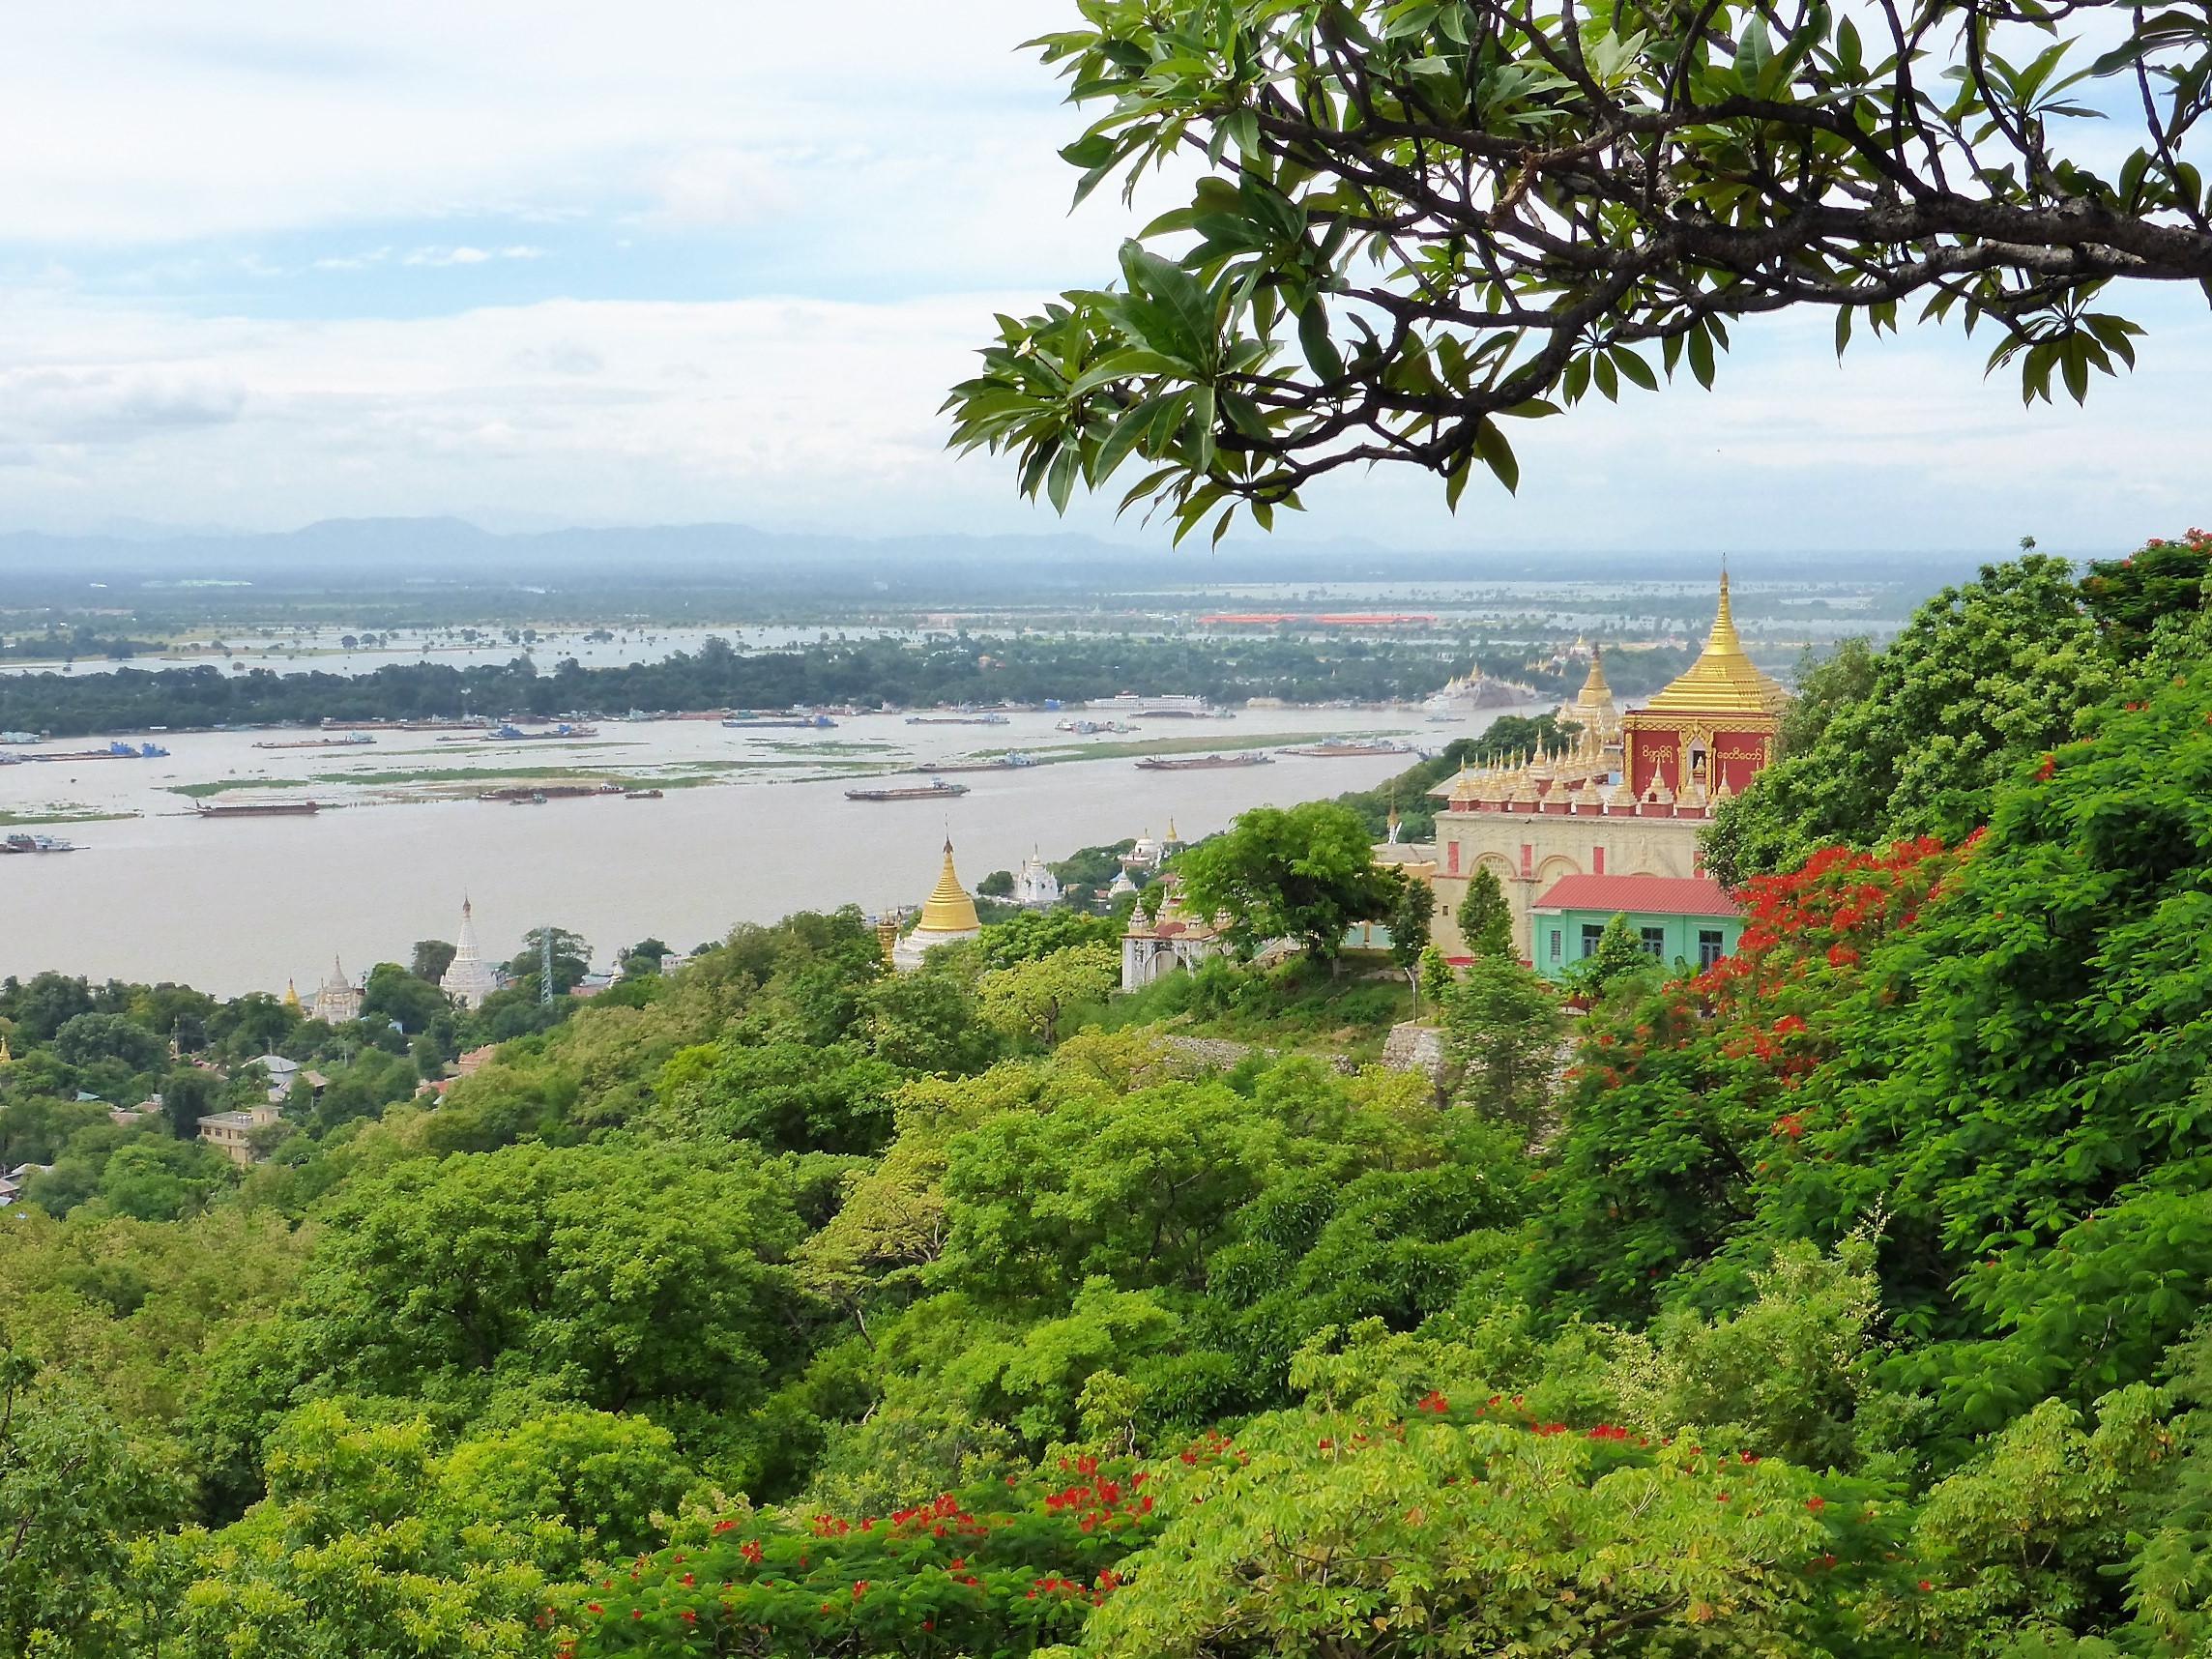 Panorama in Myanmar, green forests, temples with golden roofs, river in the background